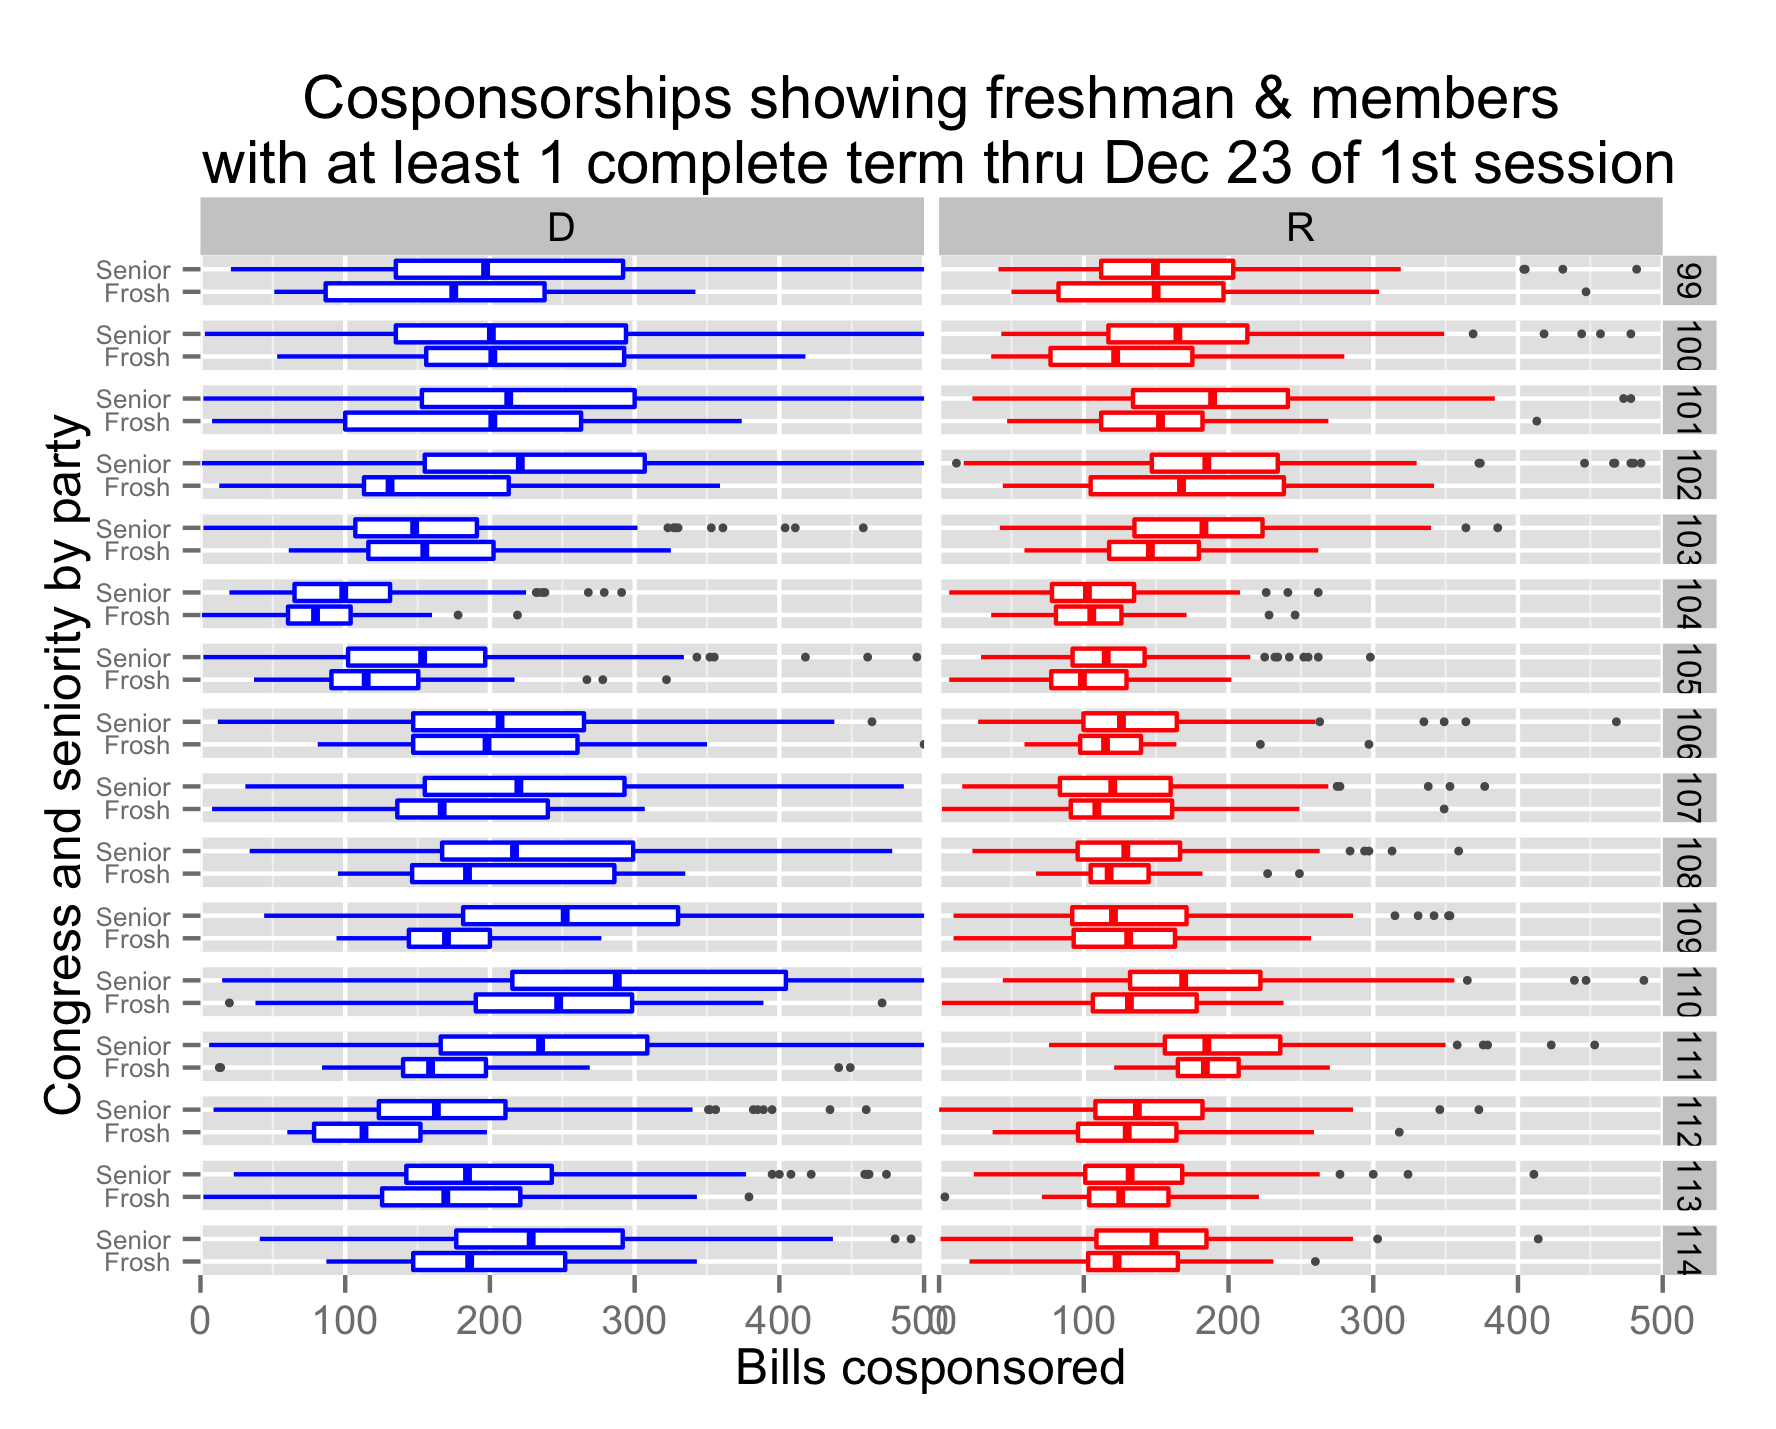 Cosponsorships by congress and party comparing first term Representatives (freshman) to more senior Representatives